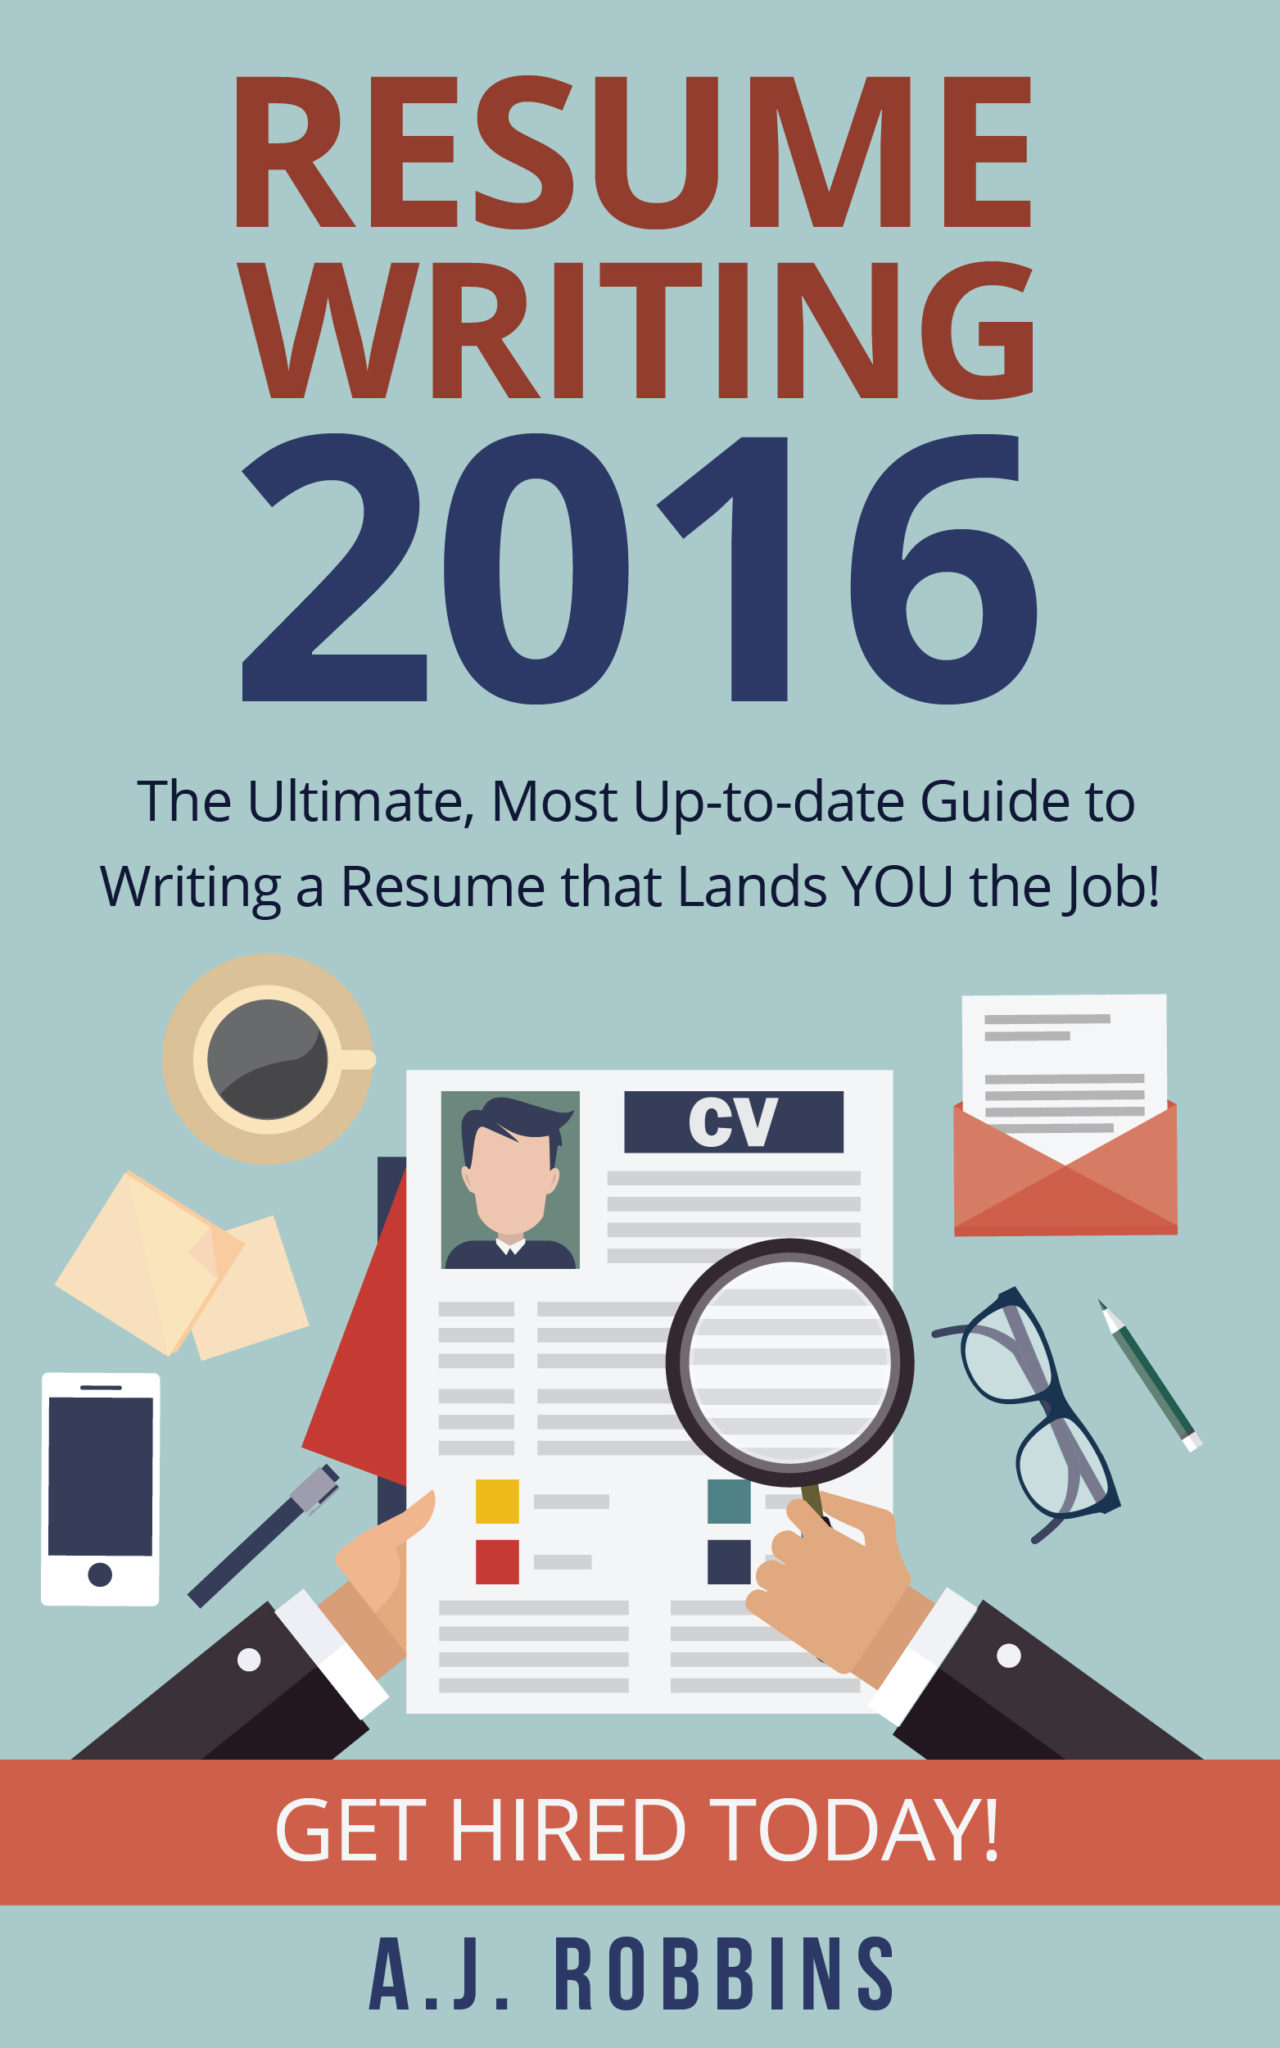 FREE: Resume: [ORIGINAL] Writing 2016 The ULTIMATE, Most Up-to-date Guide to Writing a Resume that Lands YOU the Job! by AJ Robbins